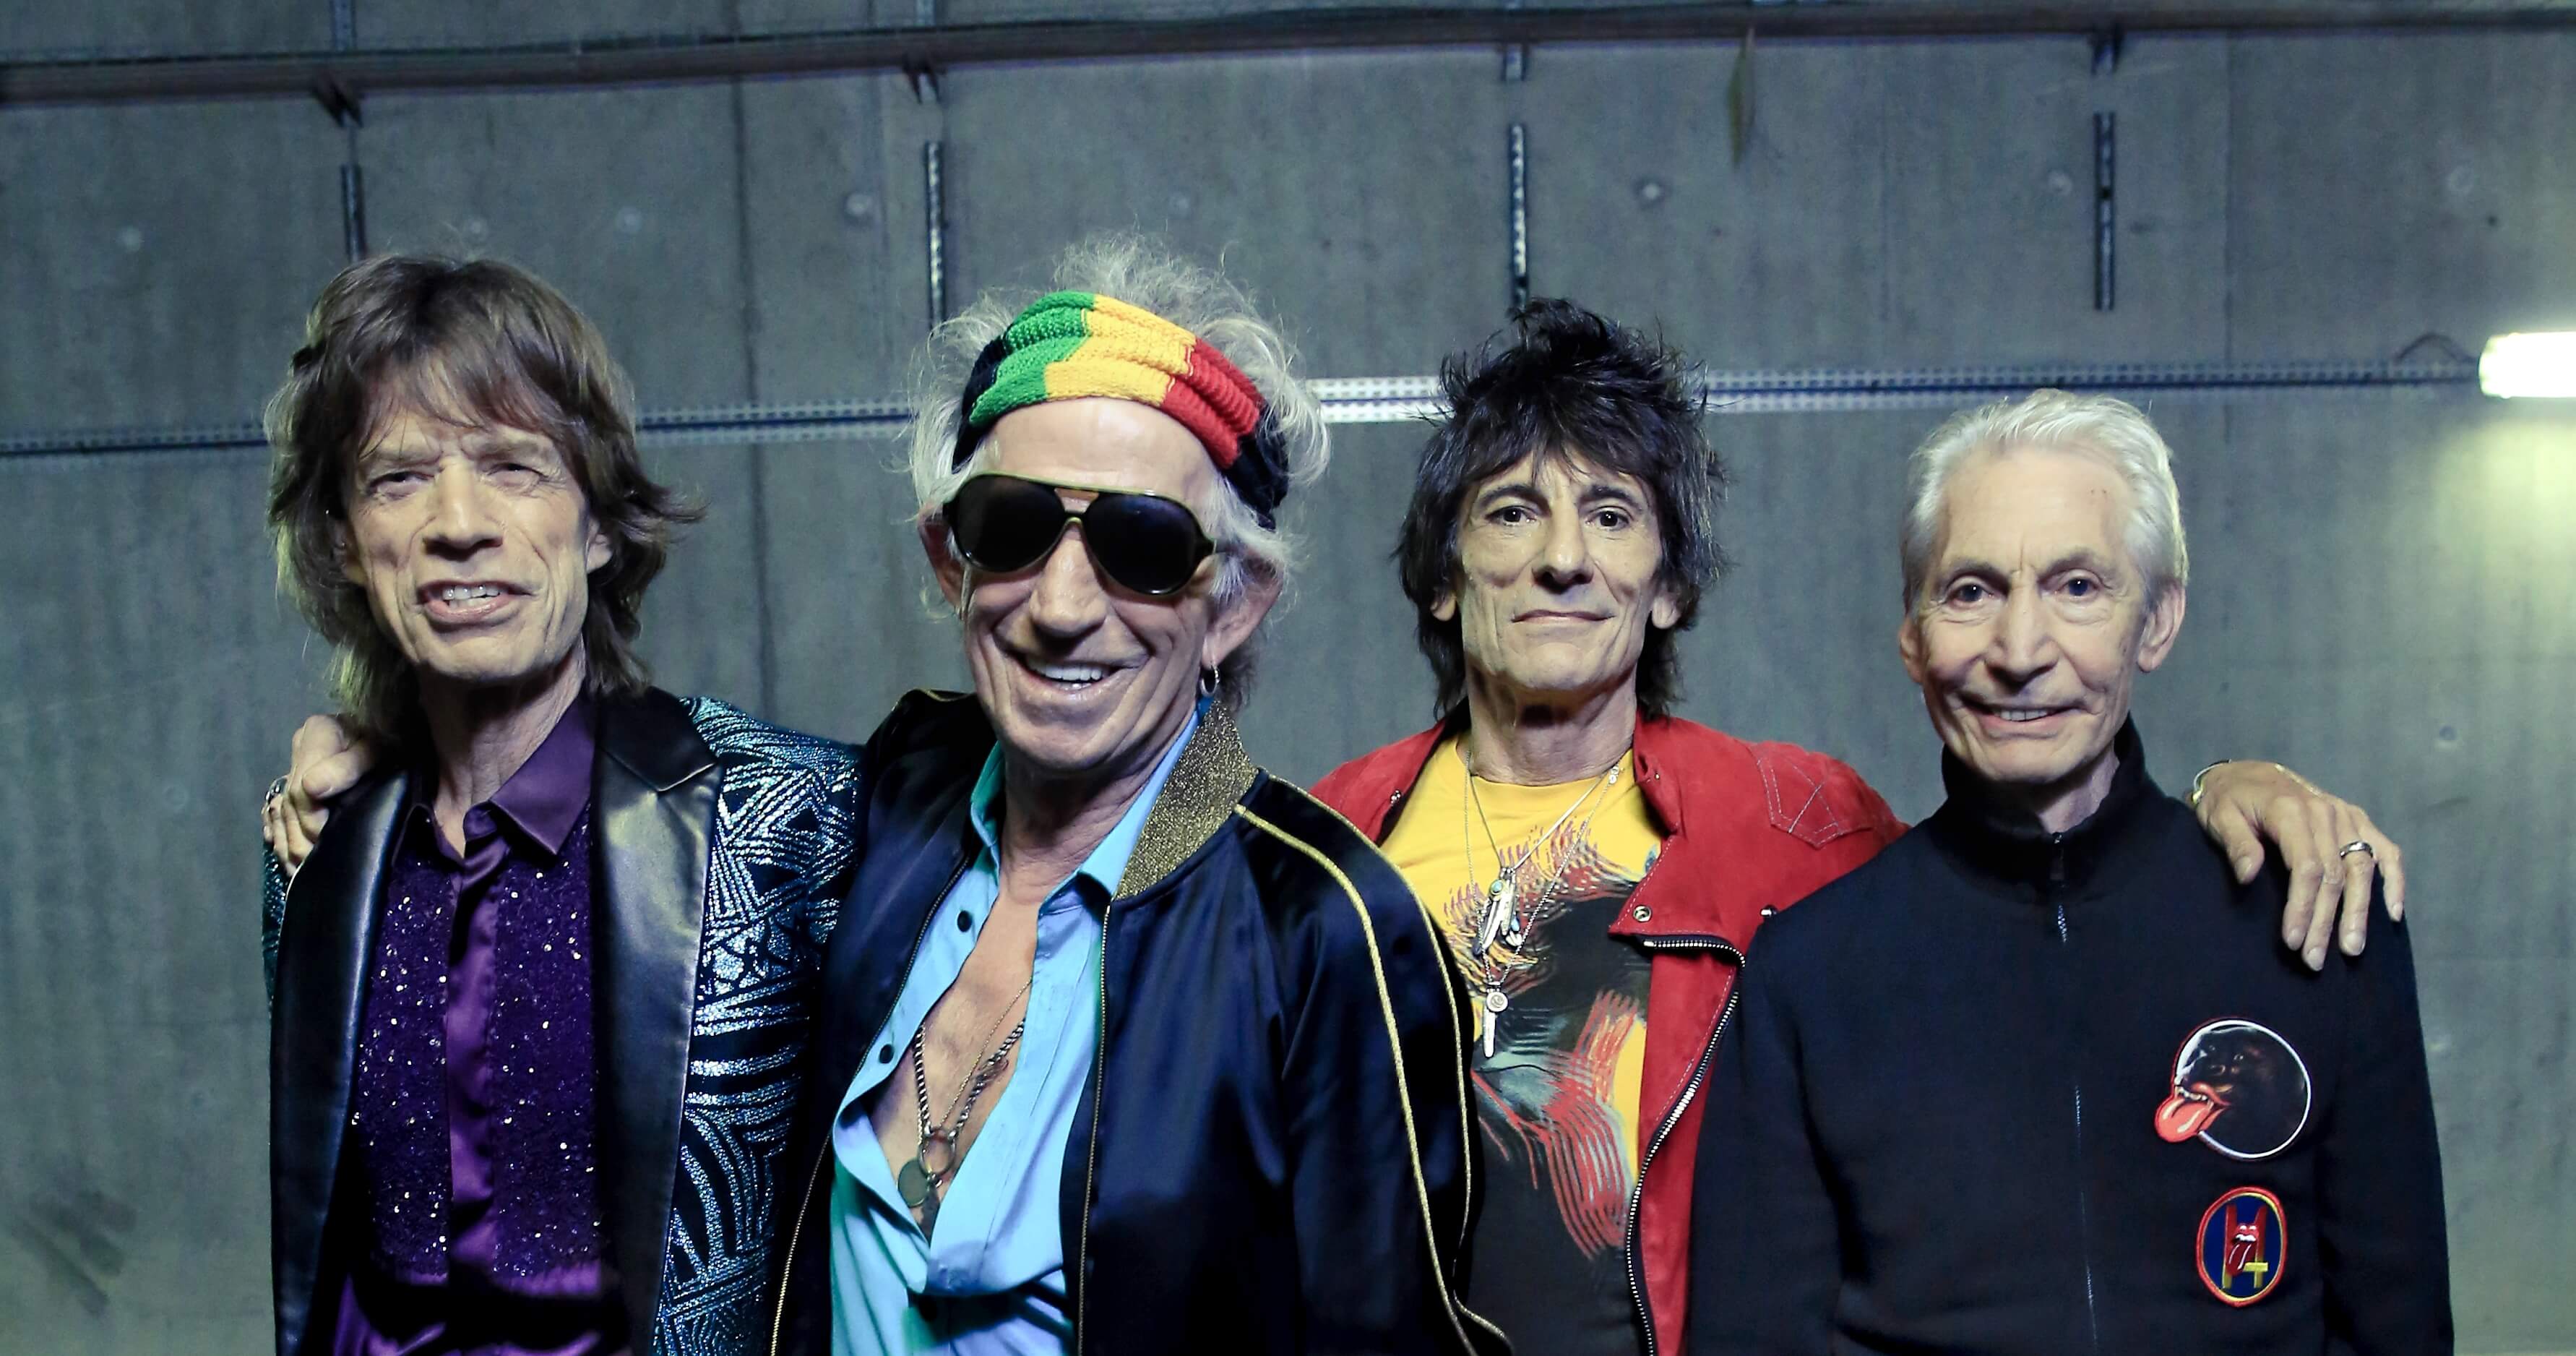 Keith Richards Confirms The Rolling Stones Are Recording - GENRE IS DEAD!